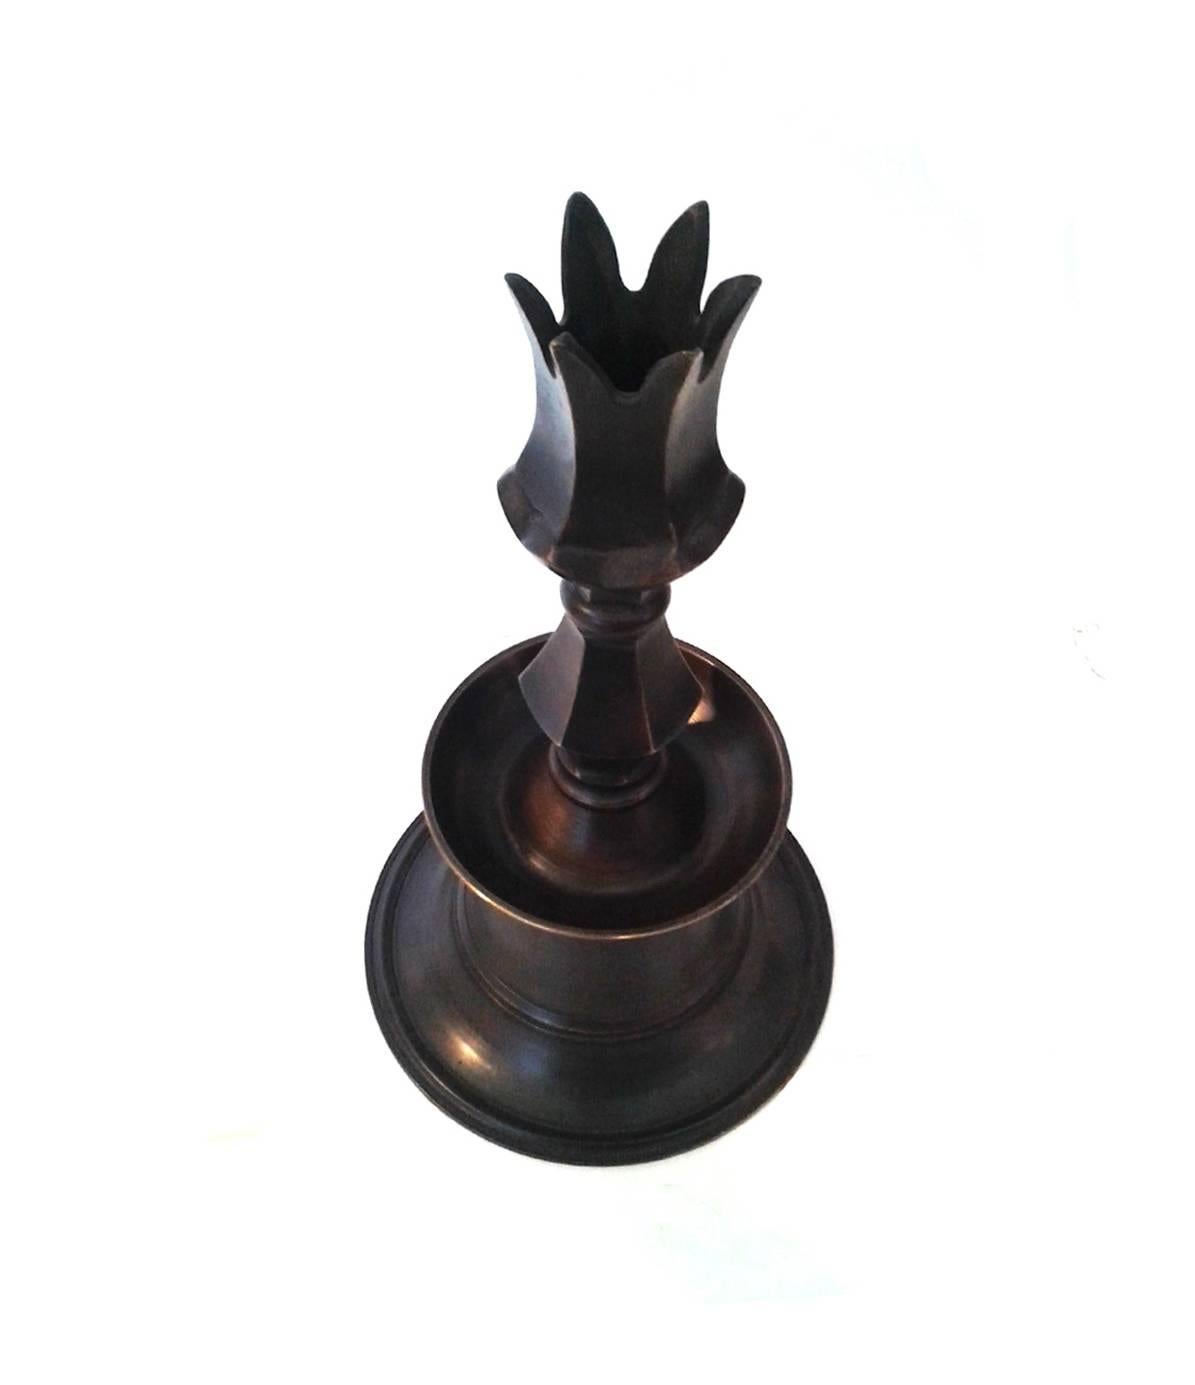 A solid brass candleholder from Turkey. Sturdy forged construction. Crown head. Measures: 15 1/4